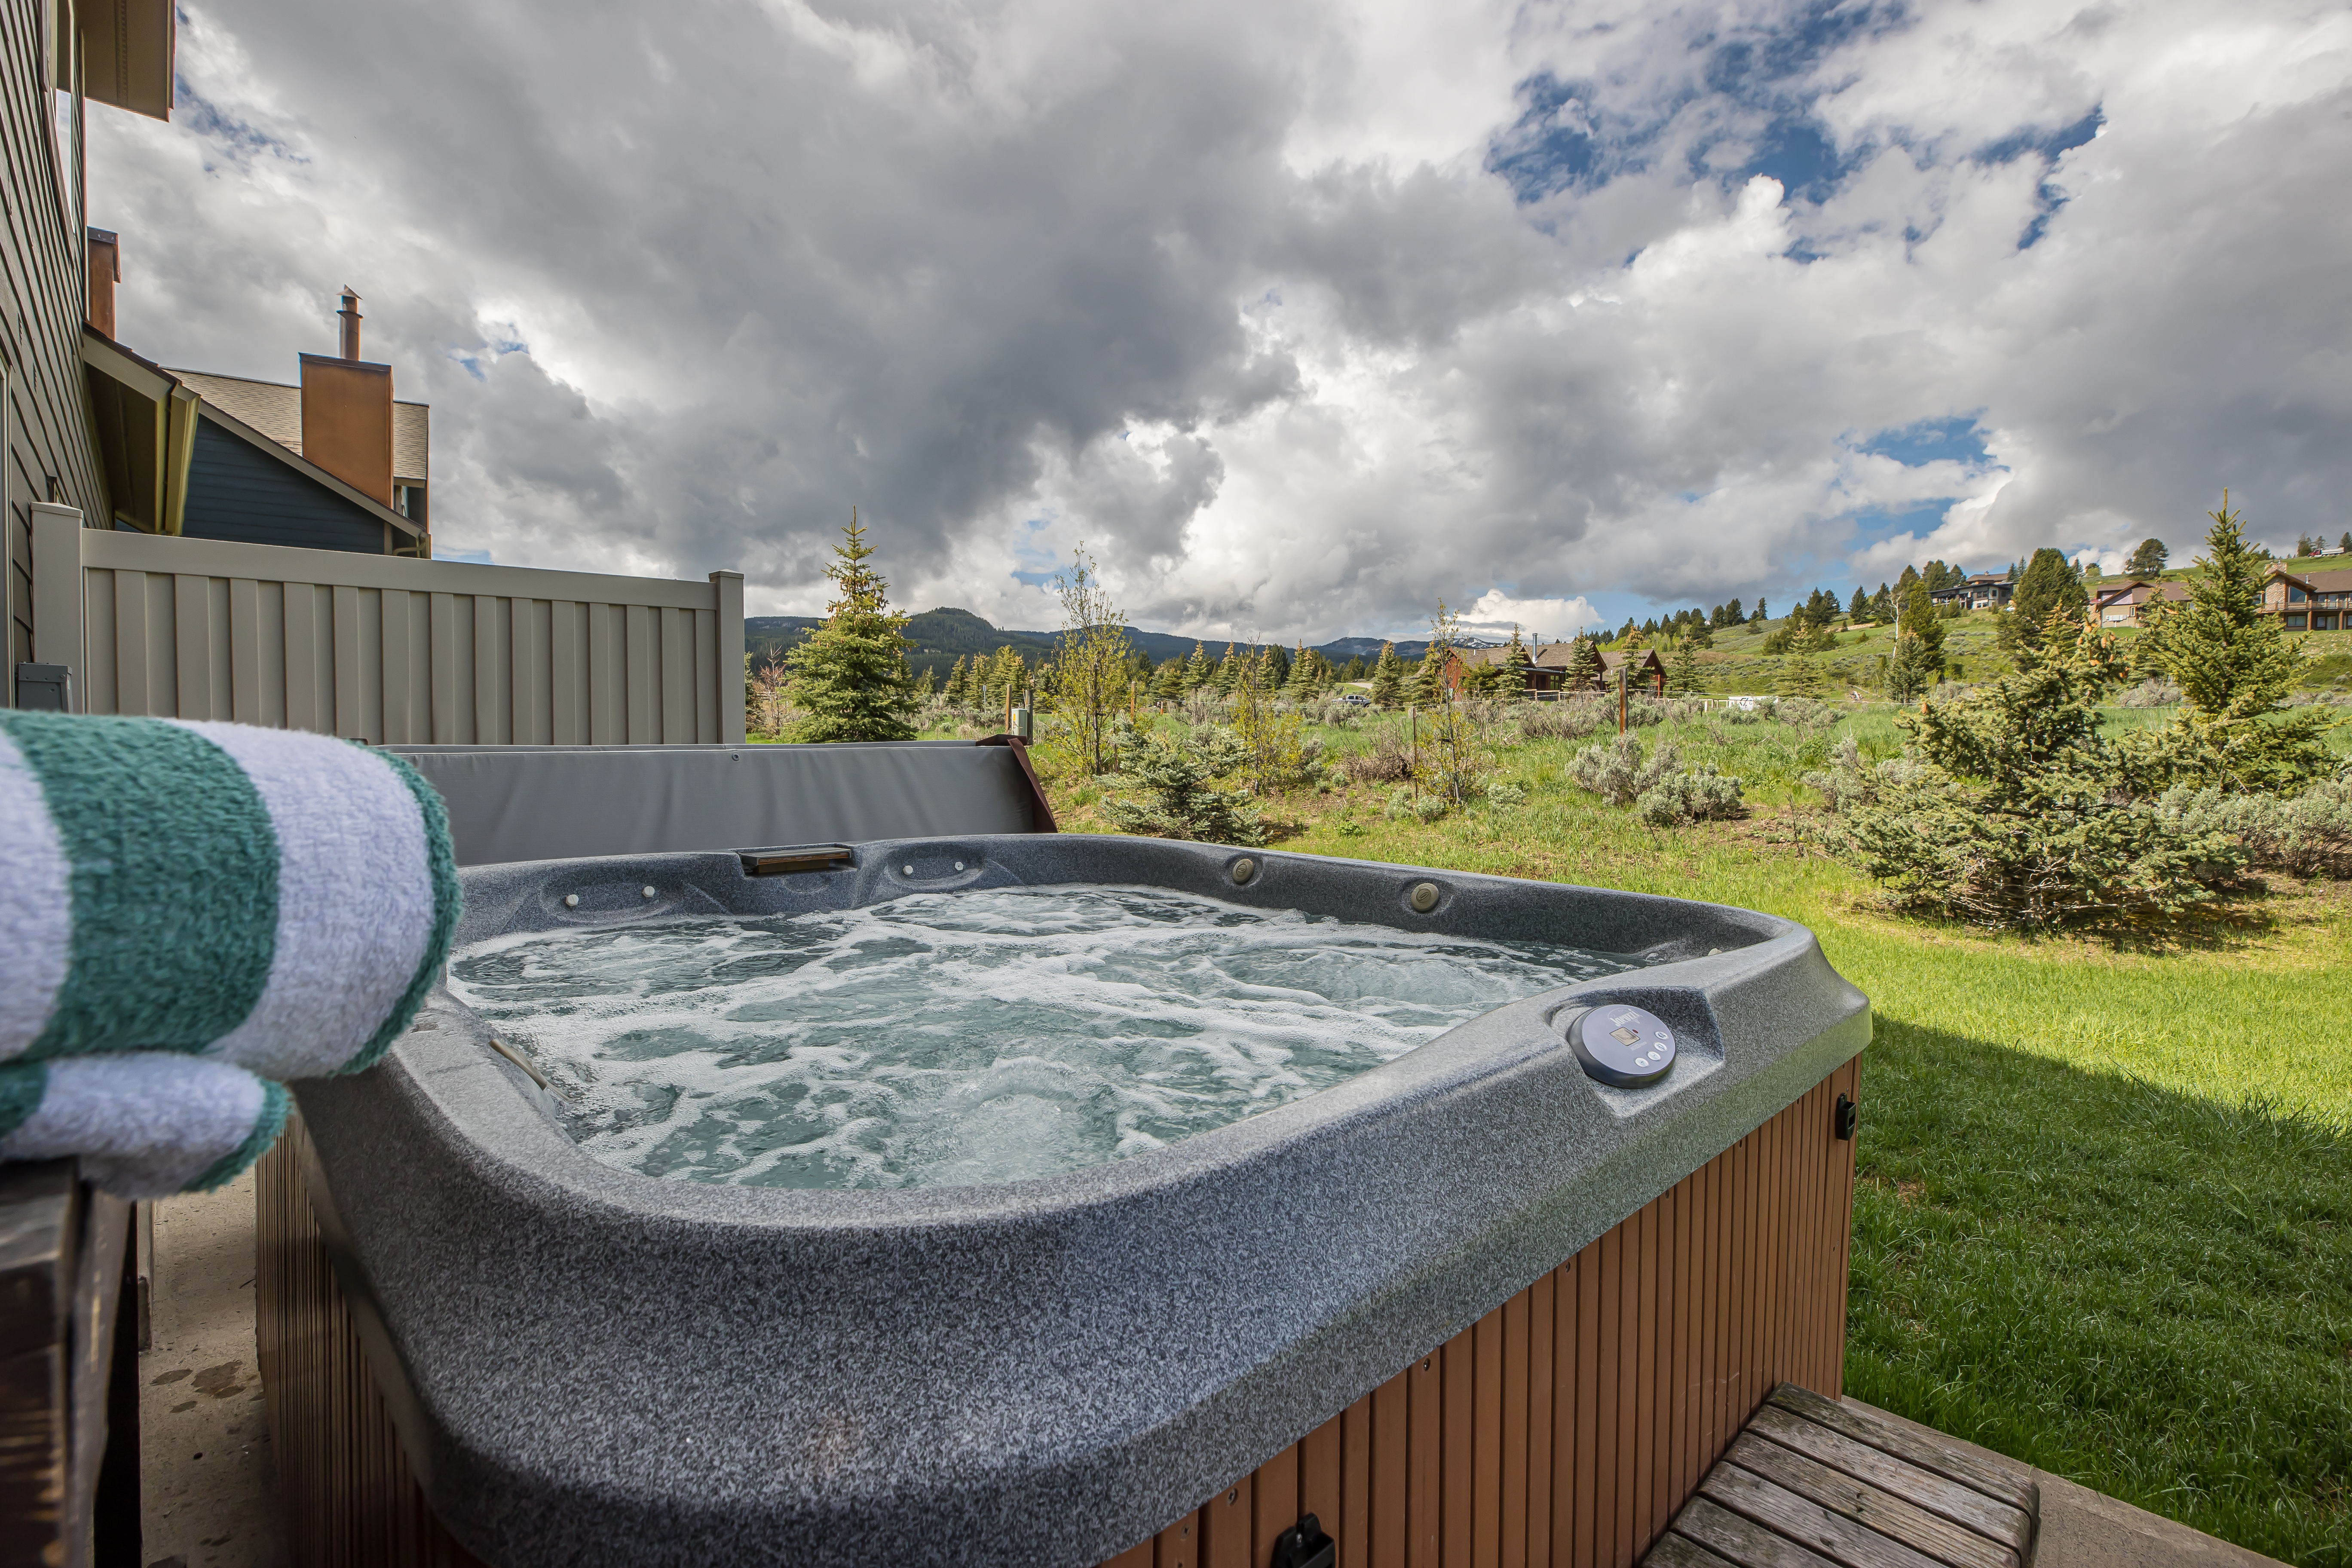 Soak in the hot tub and enjoy the views!